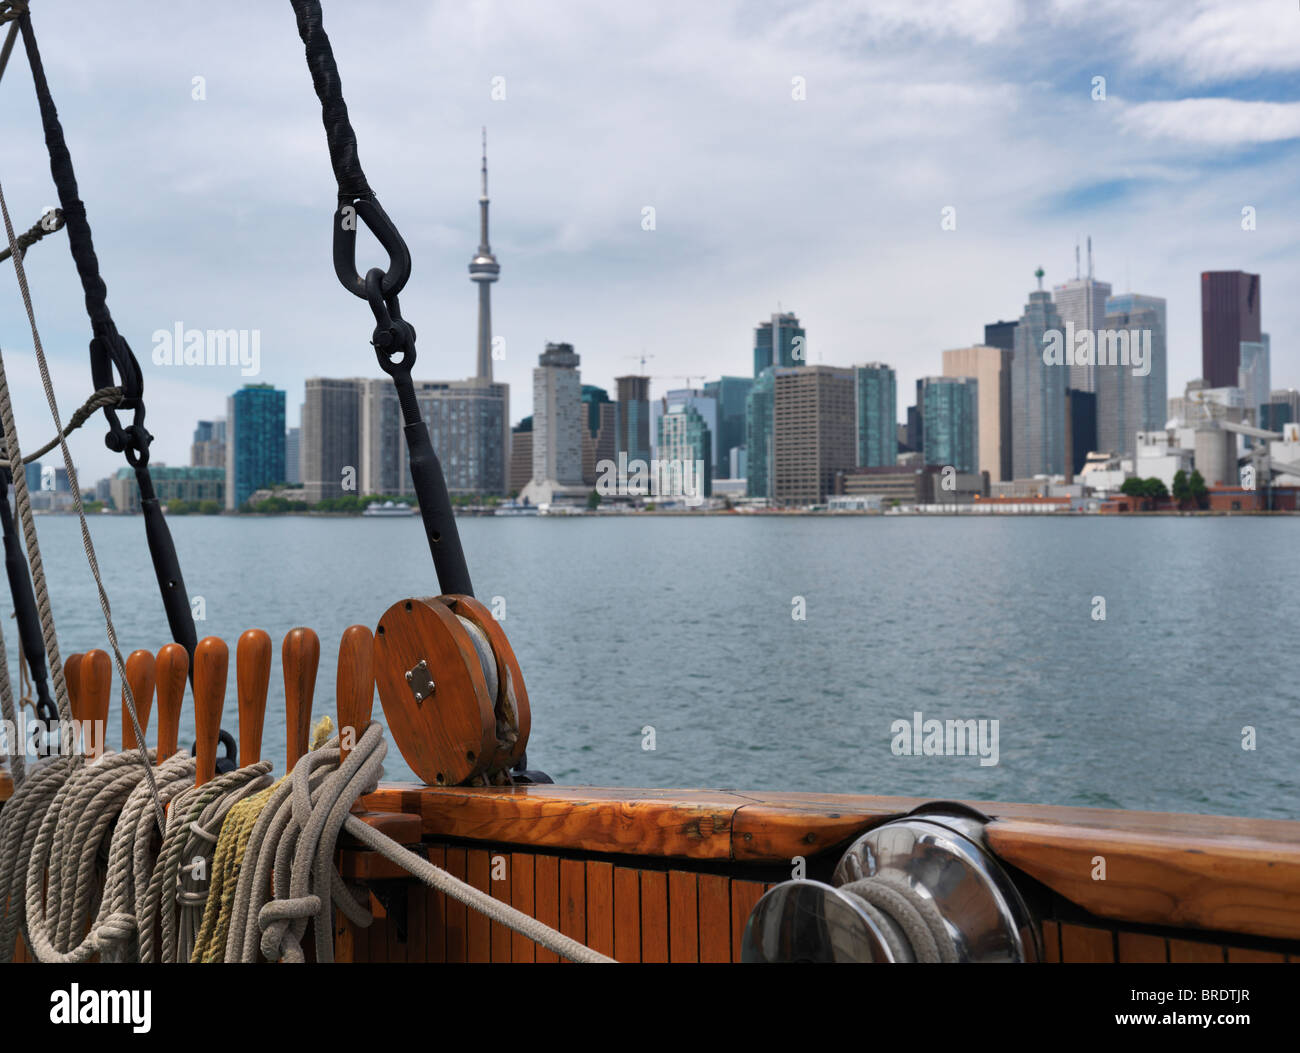 Sailing on a cruise tall ship with the city of Toronto skyline in the background. Ontario, Canada. Stock Photo